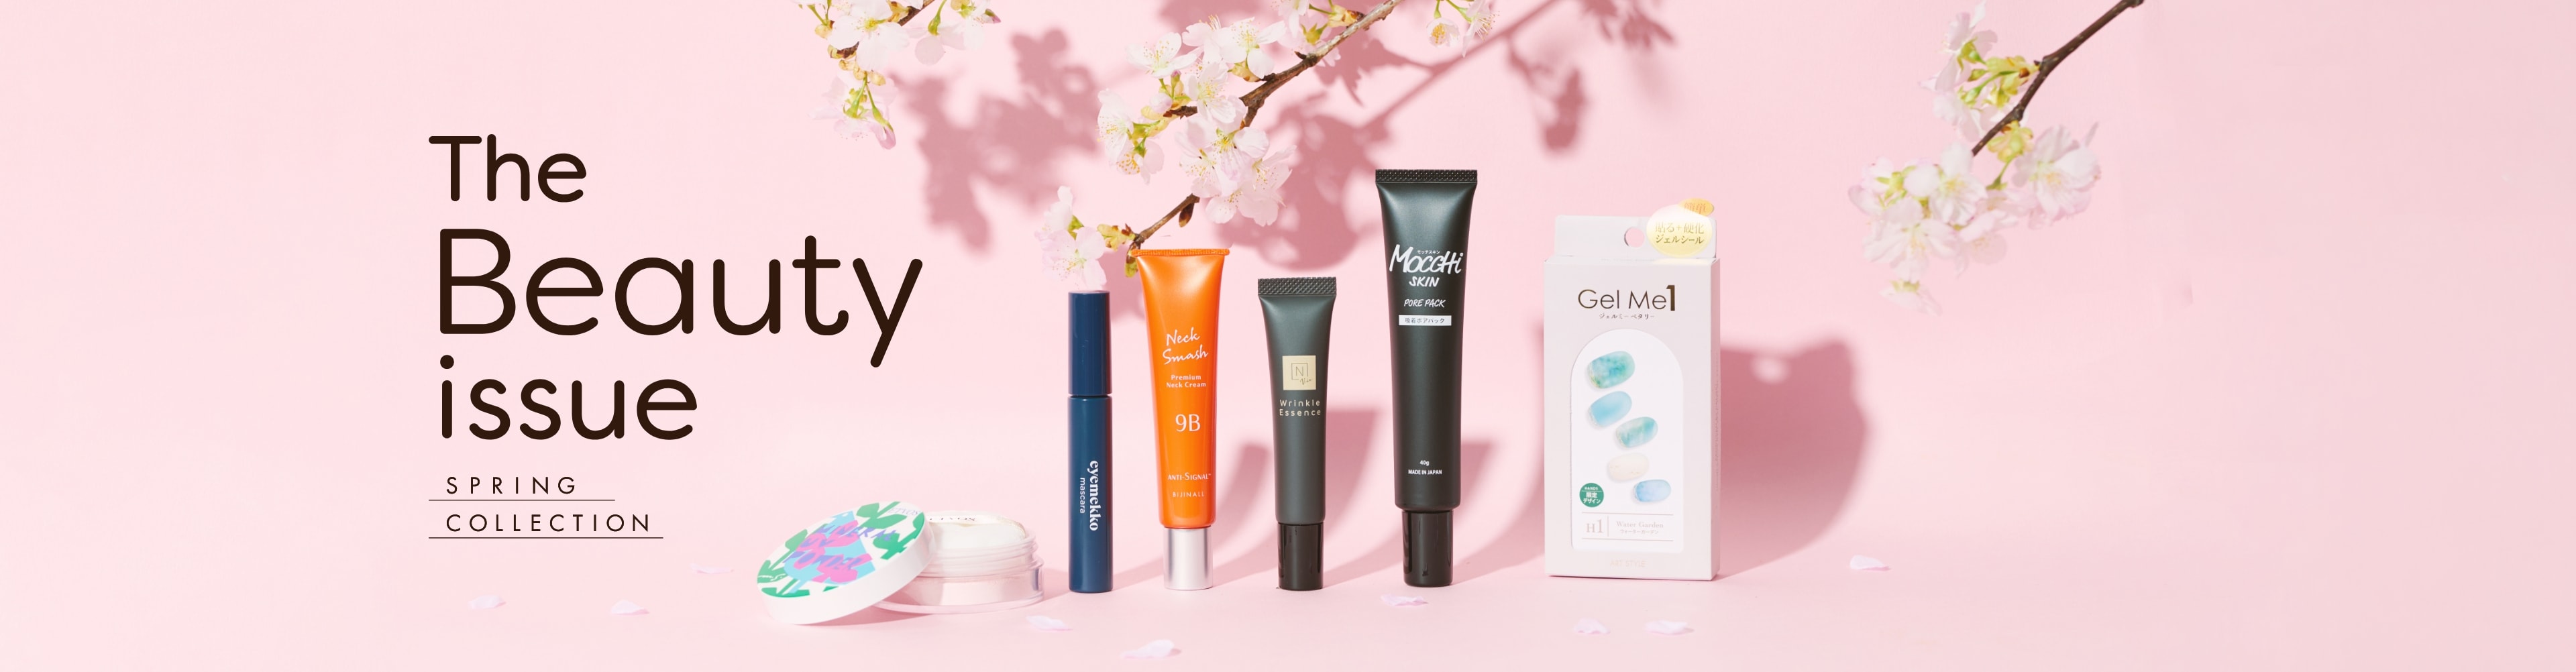 The Beauty Issue SPRING COLLECTION